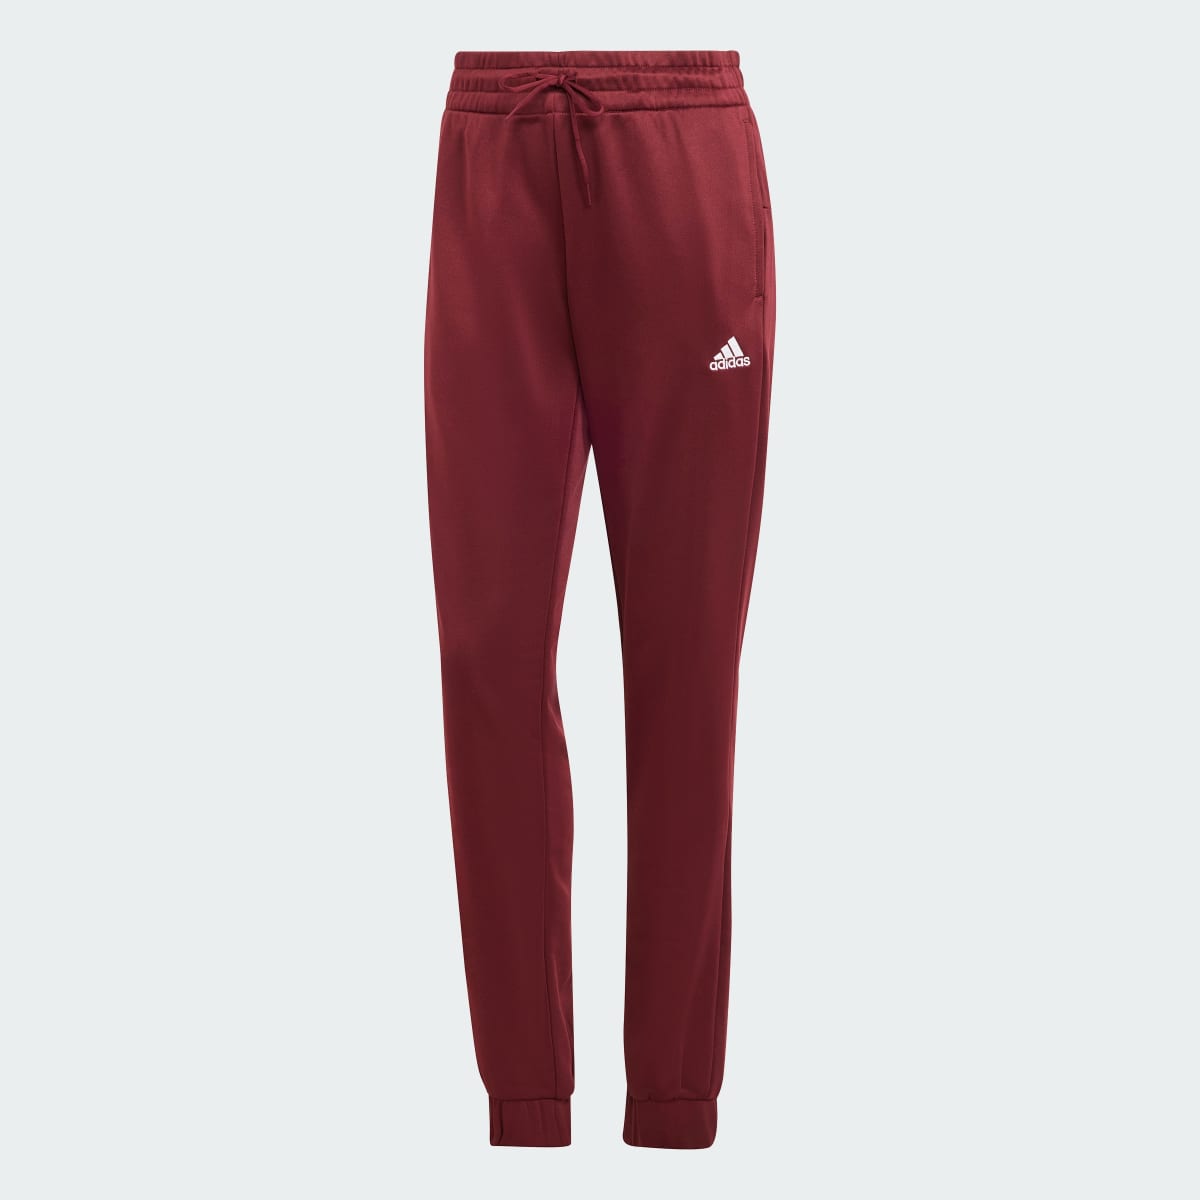 Adidas Track suit Linear. 7